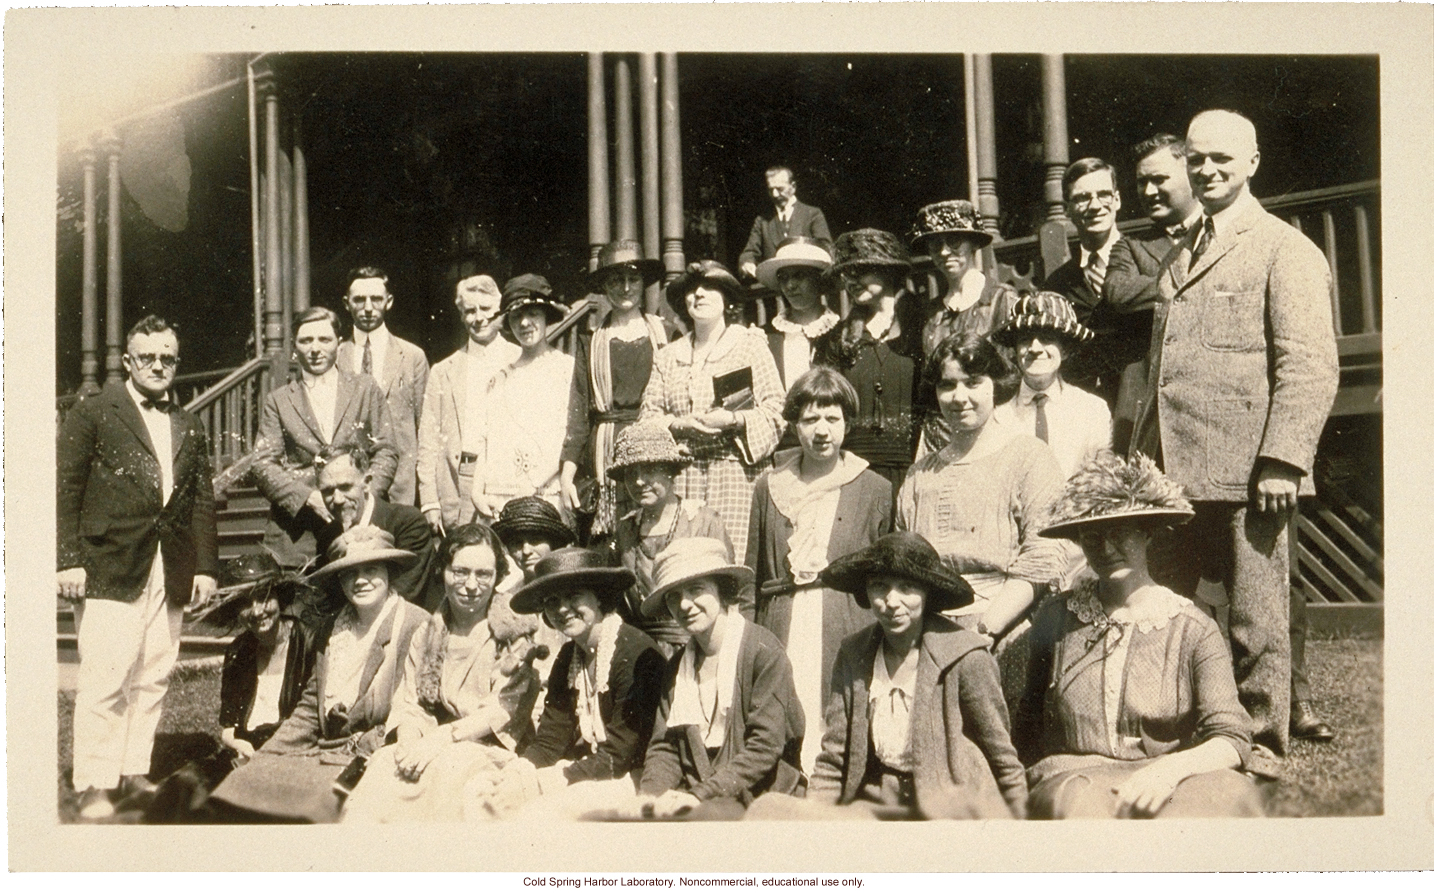 Field Worker Training Class of 1922 on field trip to Kings Park State Hospital (Laughlin on far right)